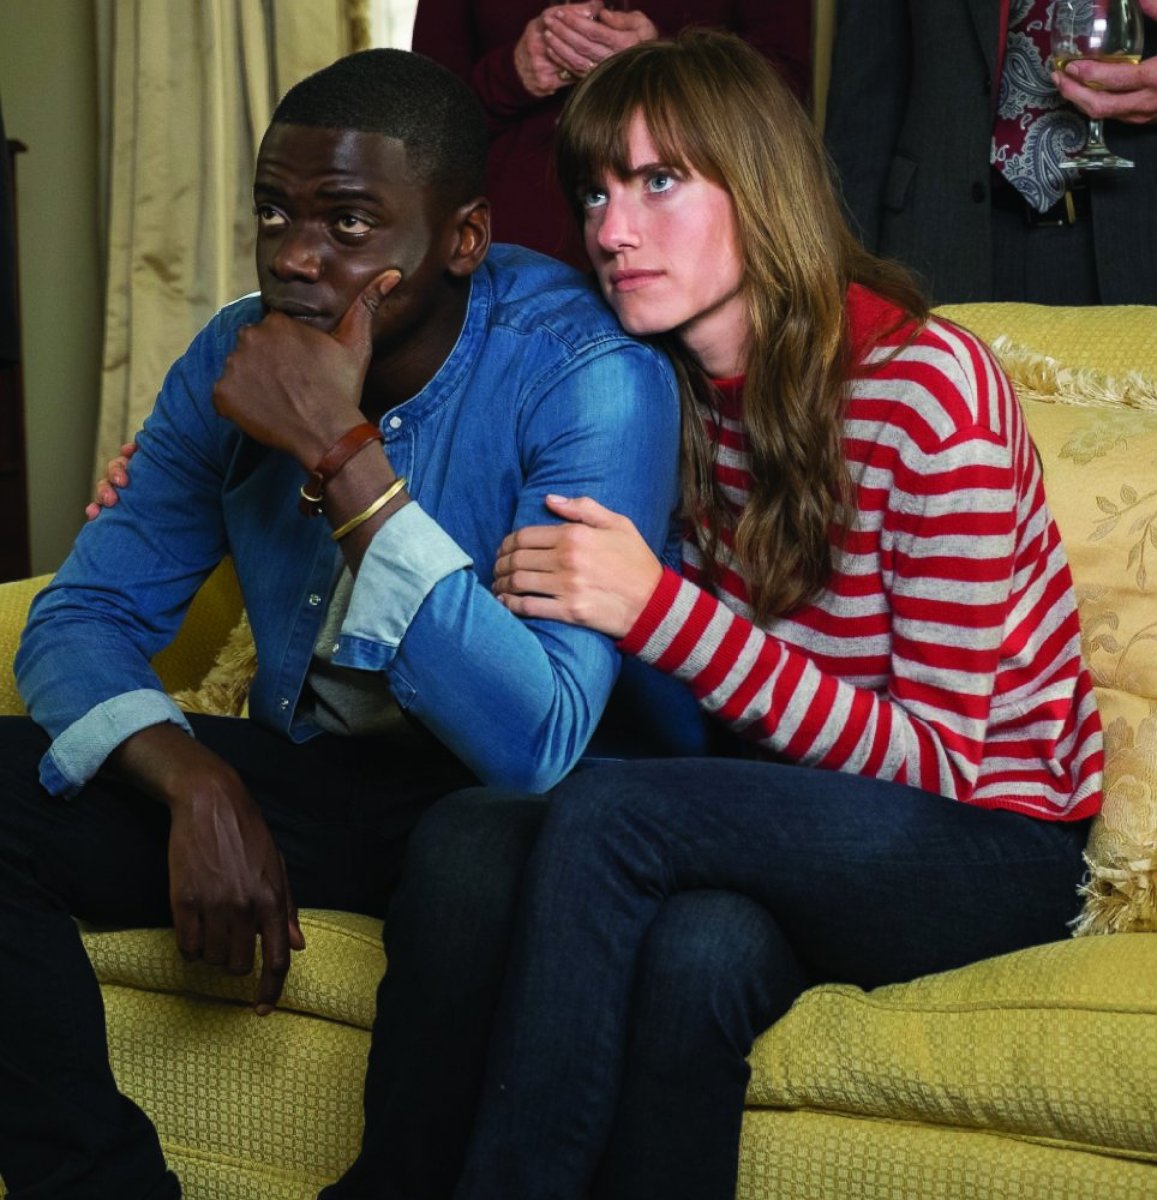 PHOTO: Daniel Kaluuya and Allison Williams in the movie "Get Out," 2017.